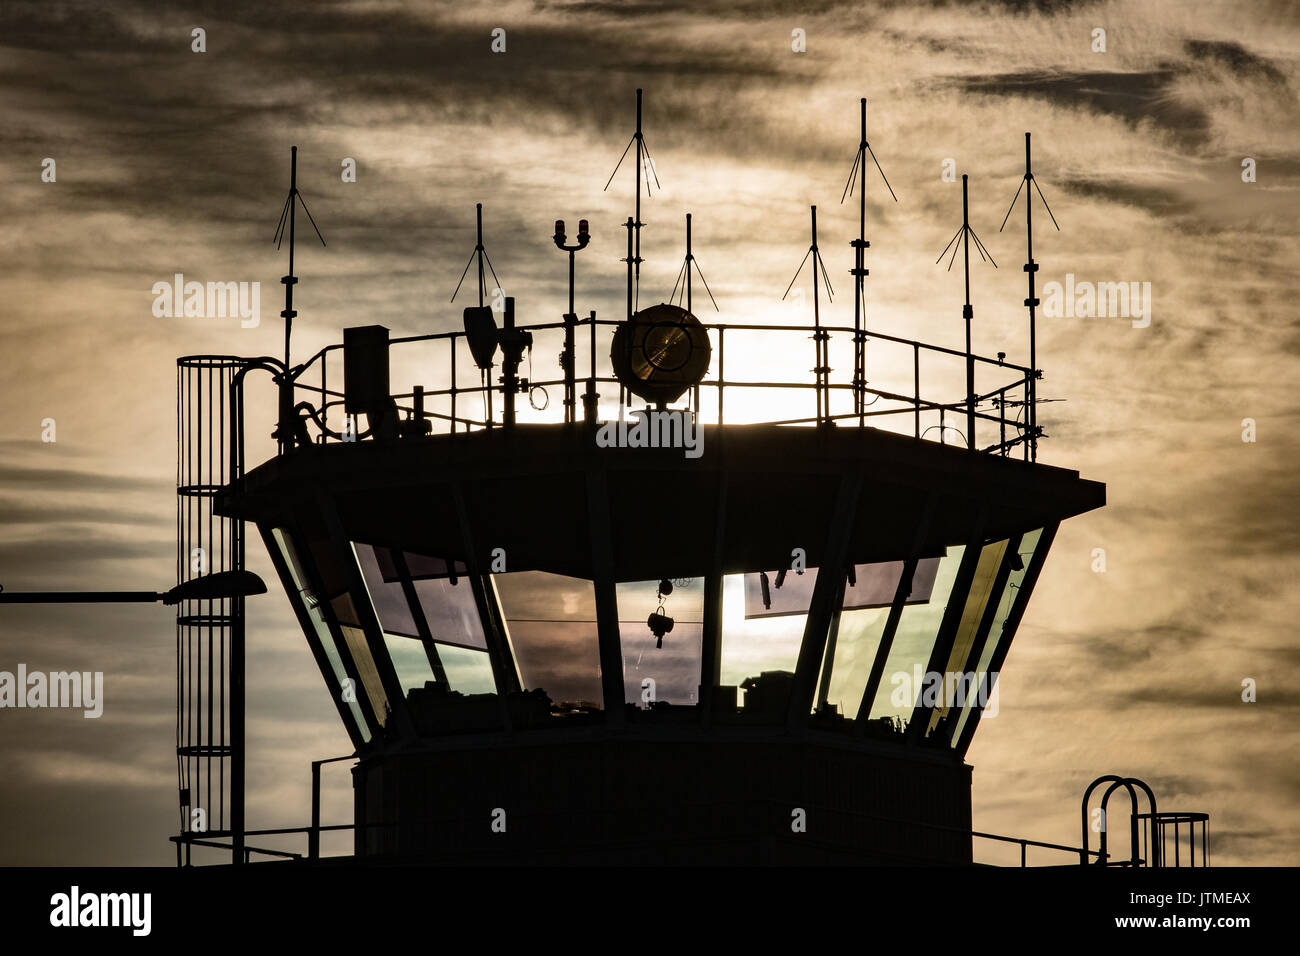 Control Tower Silhouette 2 Stock Photo